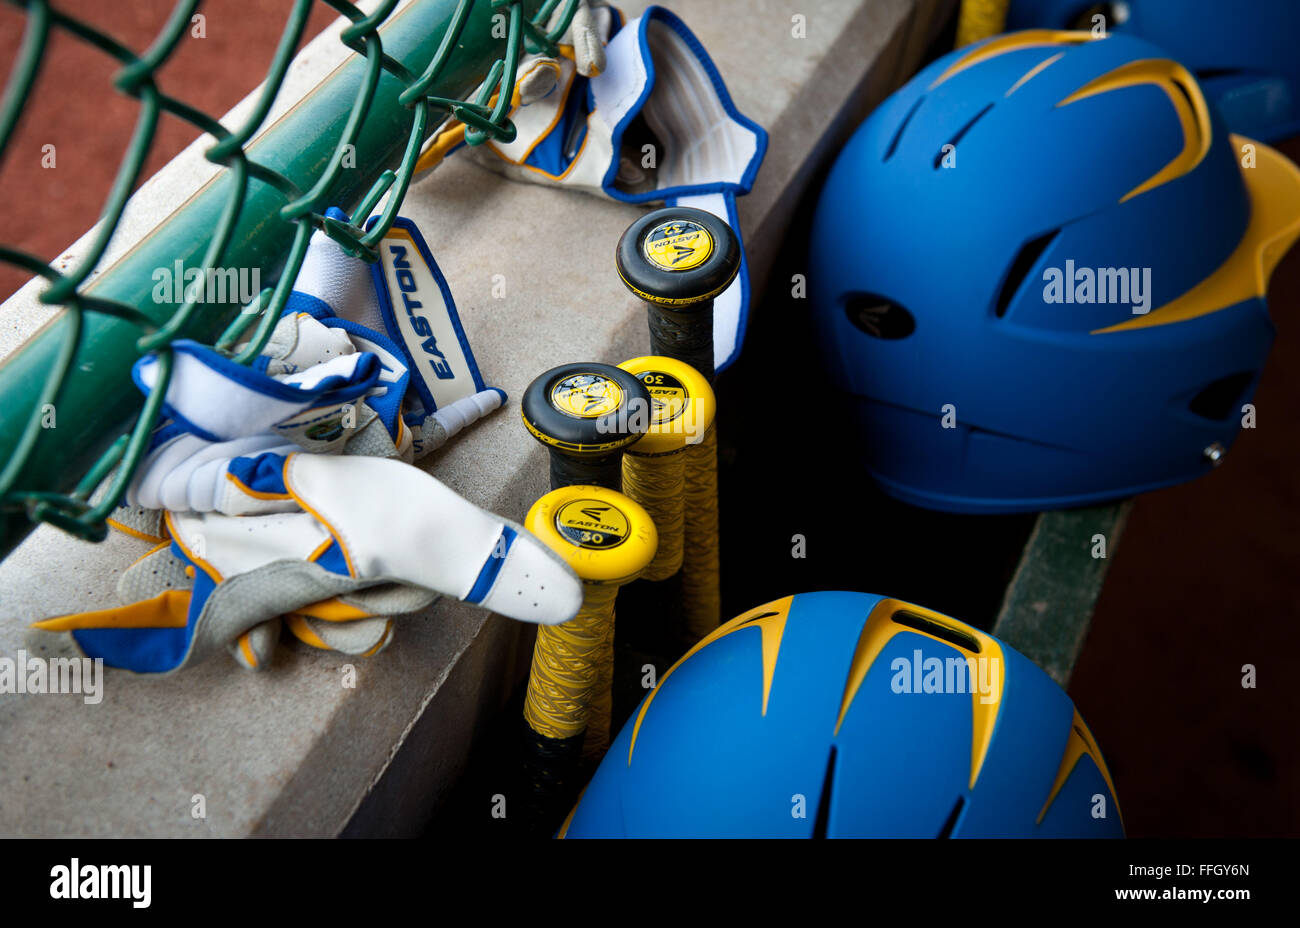 At the 2012 Little League World Series, teams representing each region of the world were given new baseball equipment. The LLWS was held in South Williamsport, Pa. Stock Photo